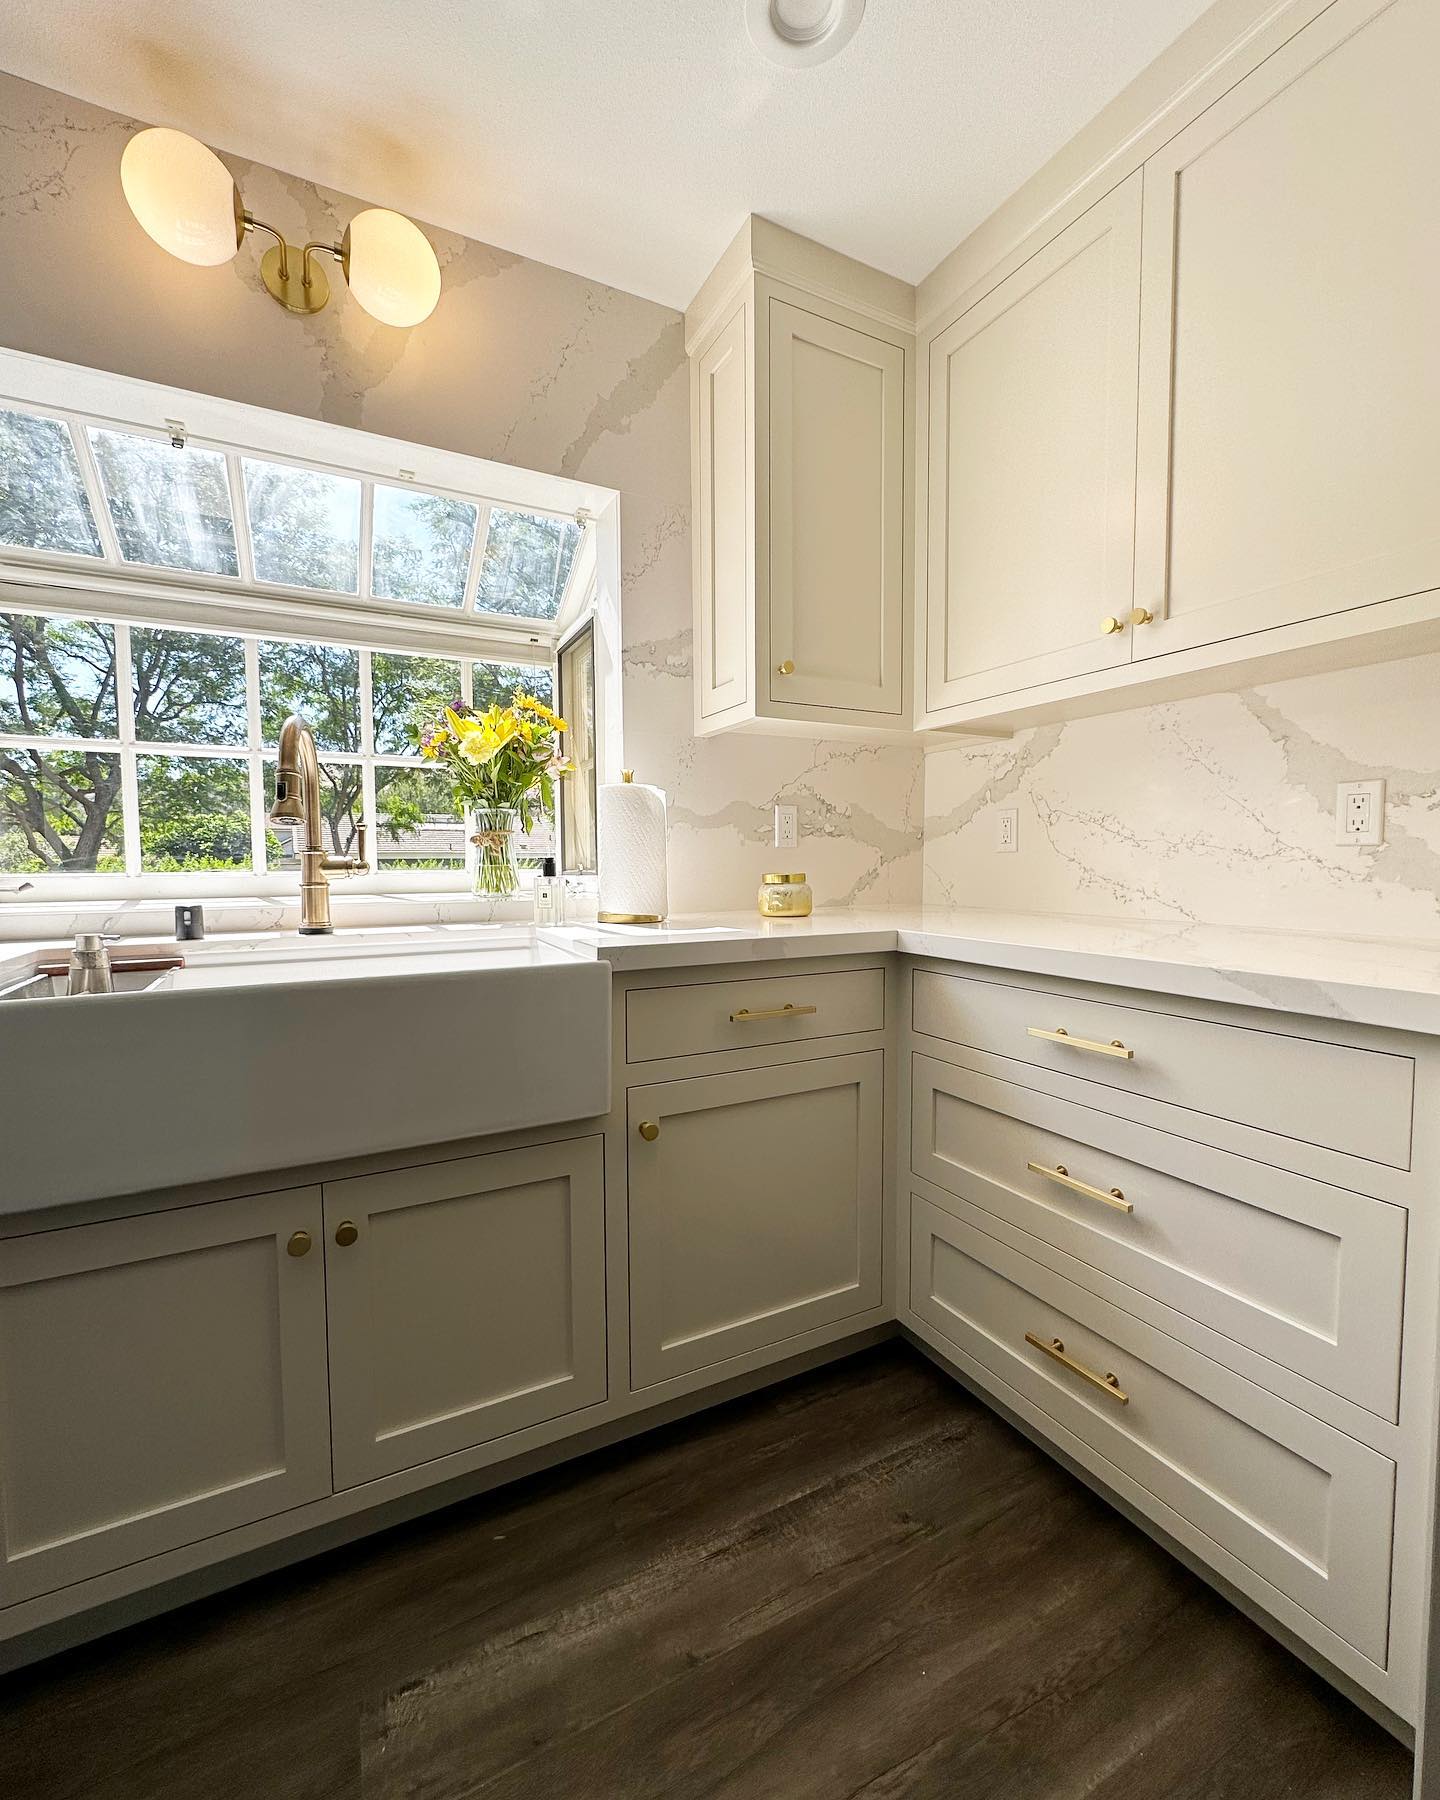 Kitchen Remodel Ideas on a Budget: Achieve the Look for Less